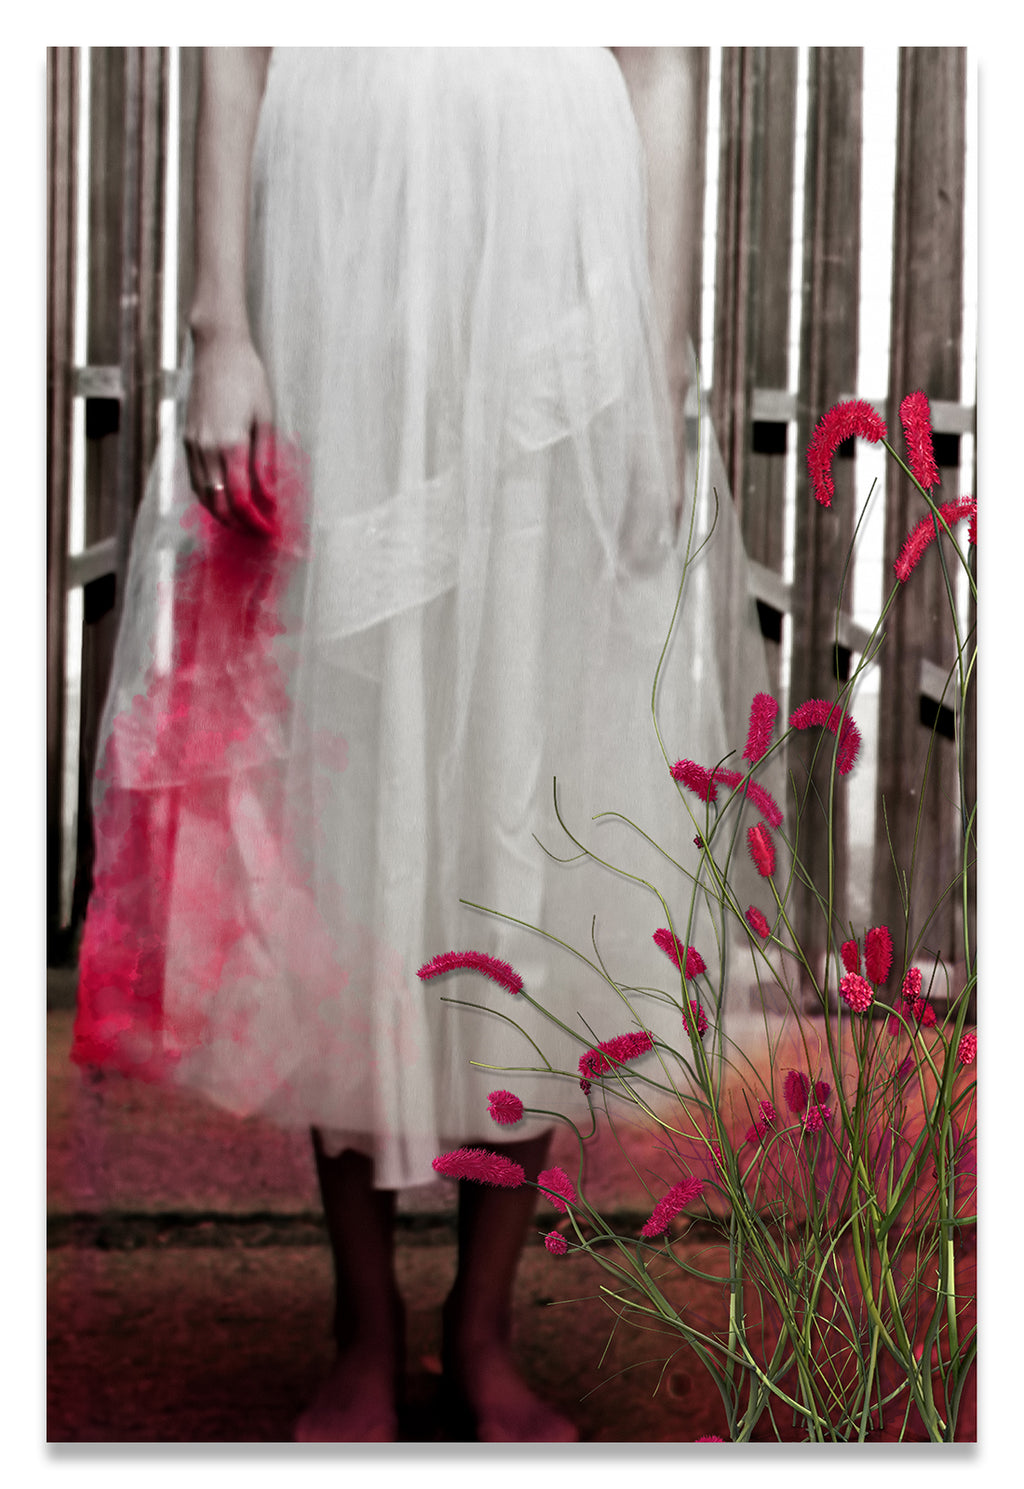 Woman in a Vintage White Lace Dress, cropped at waist, Standing With a Bloody Hand Dripping Down Her Dress in front of a Gate-Metal Print-Aluminum Print